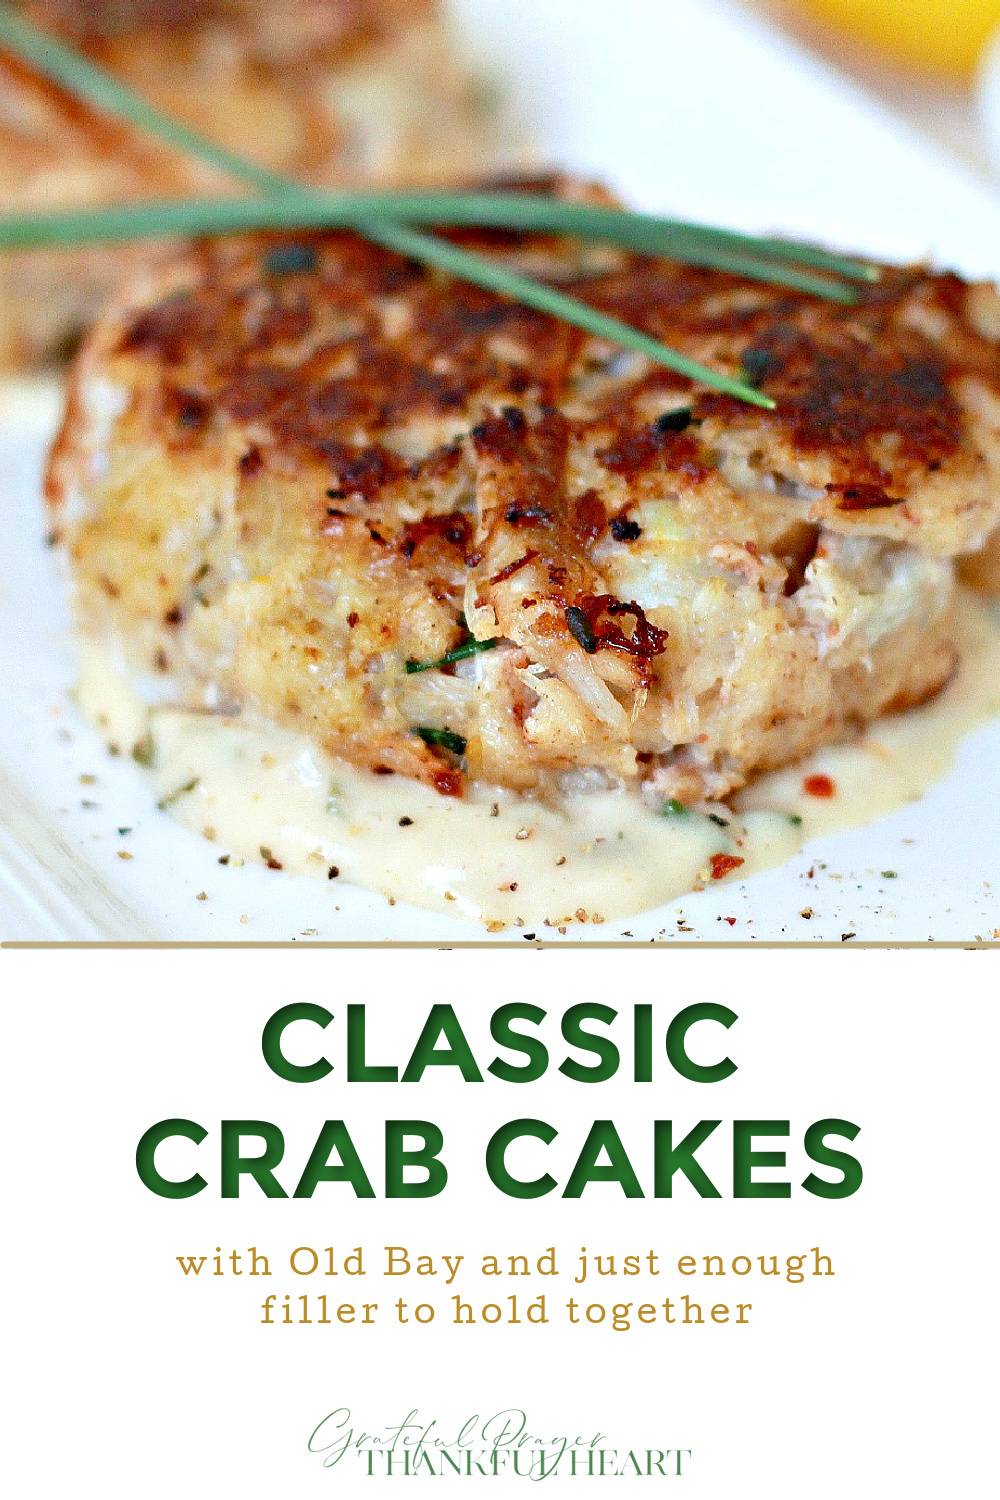 Classic crab cake recipe with old Bay seasoning and just enough filler to shape the patties.